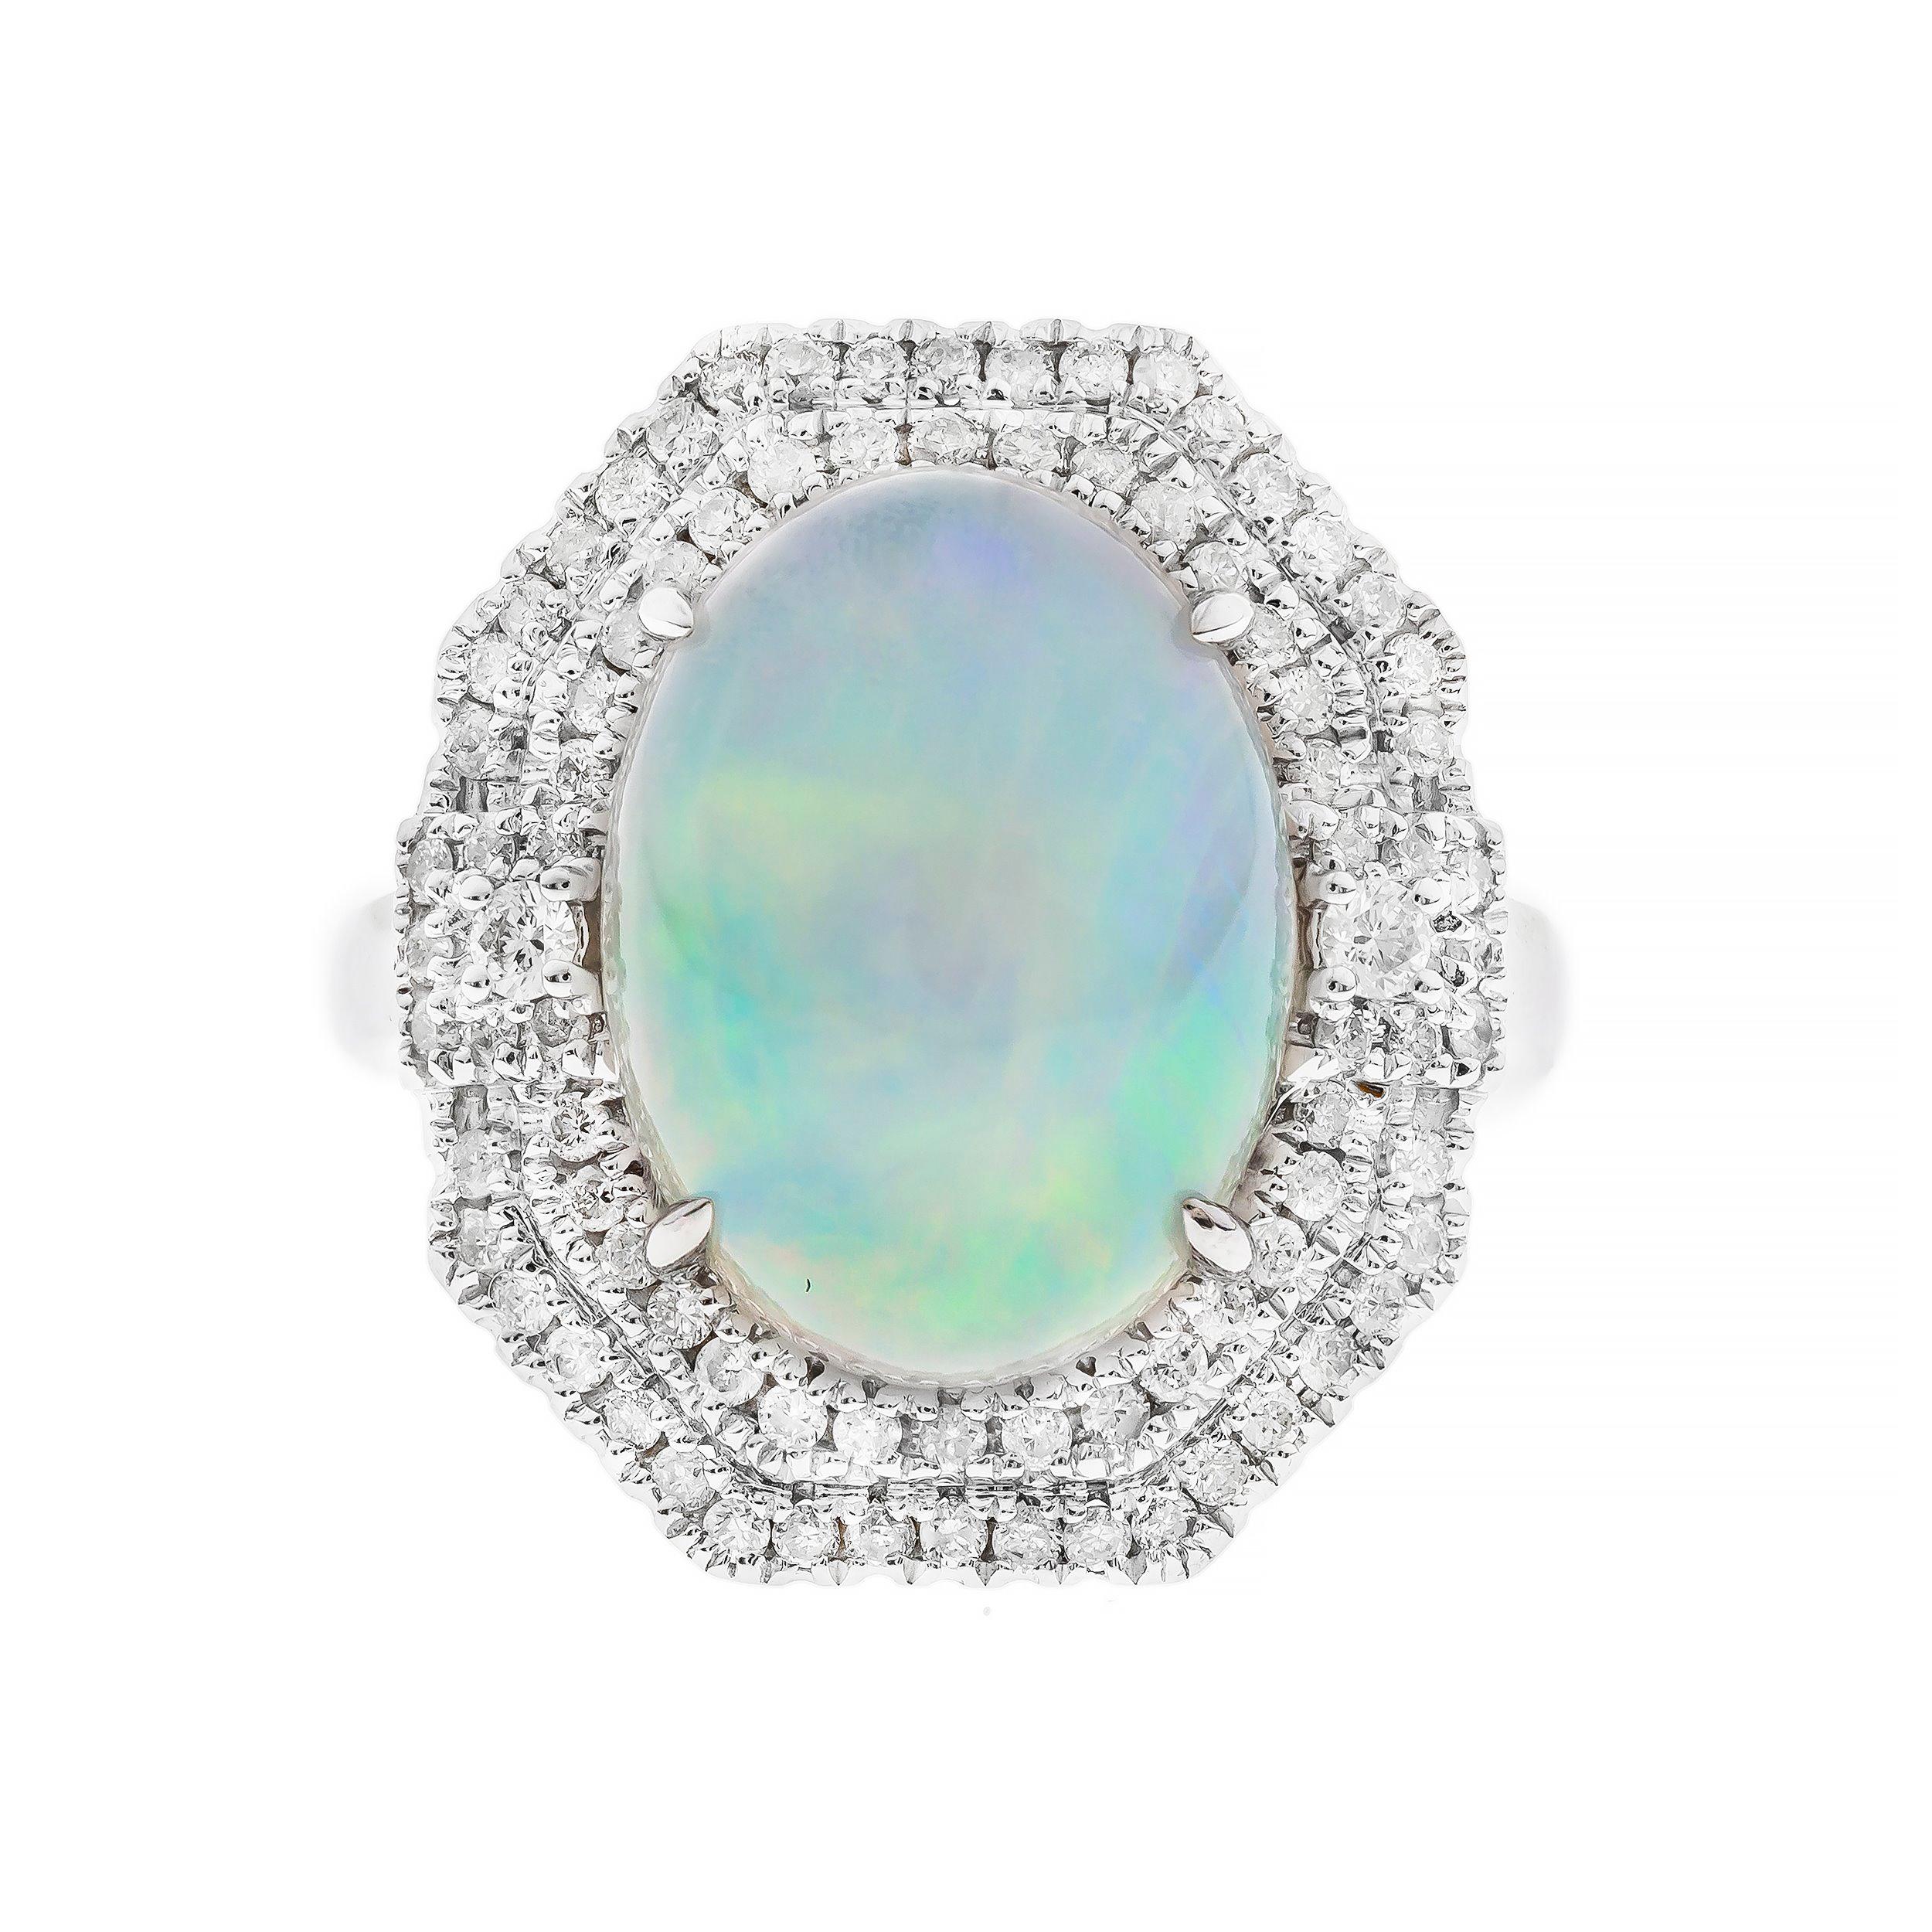 Oval Cut 7.52 Carat Oval Cab Ethiopian Opal Diamond Accents 14K White Gold Ring